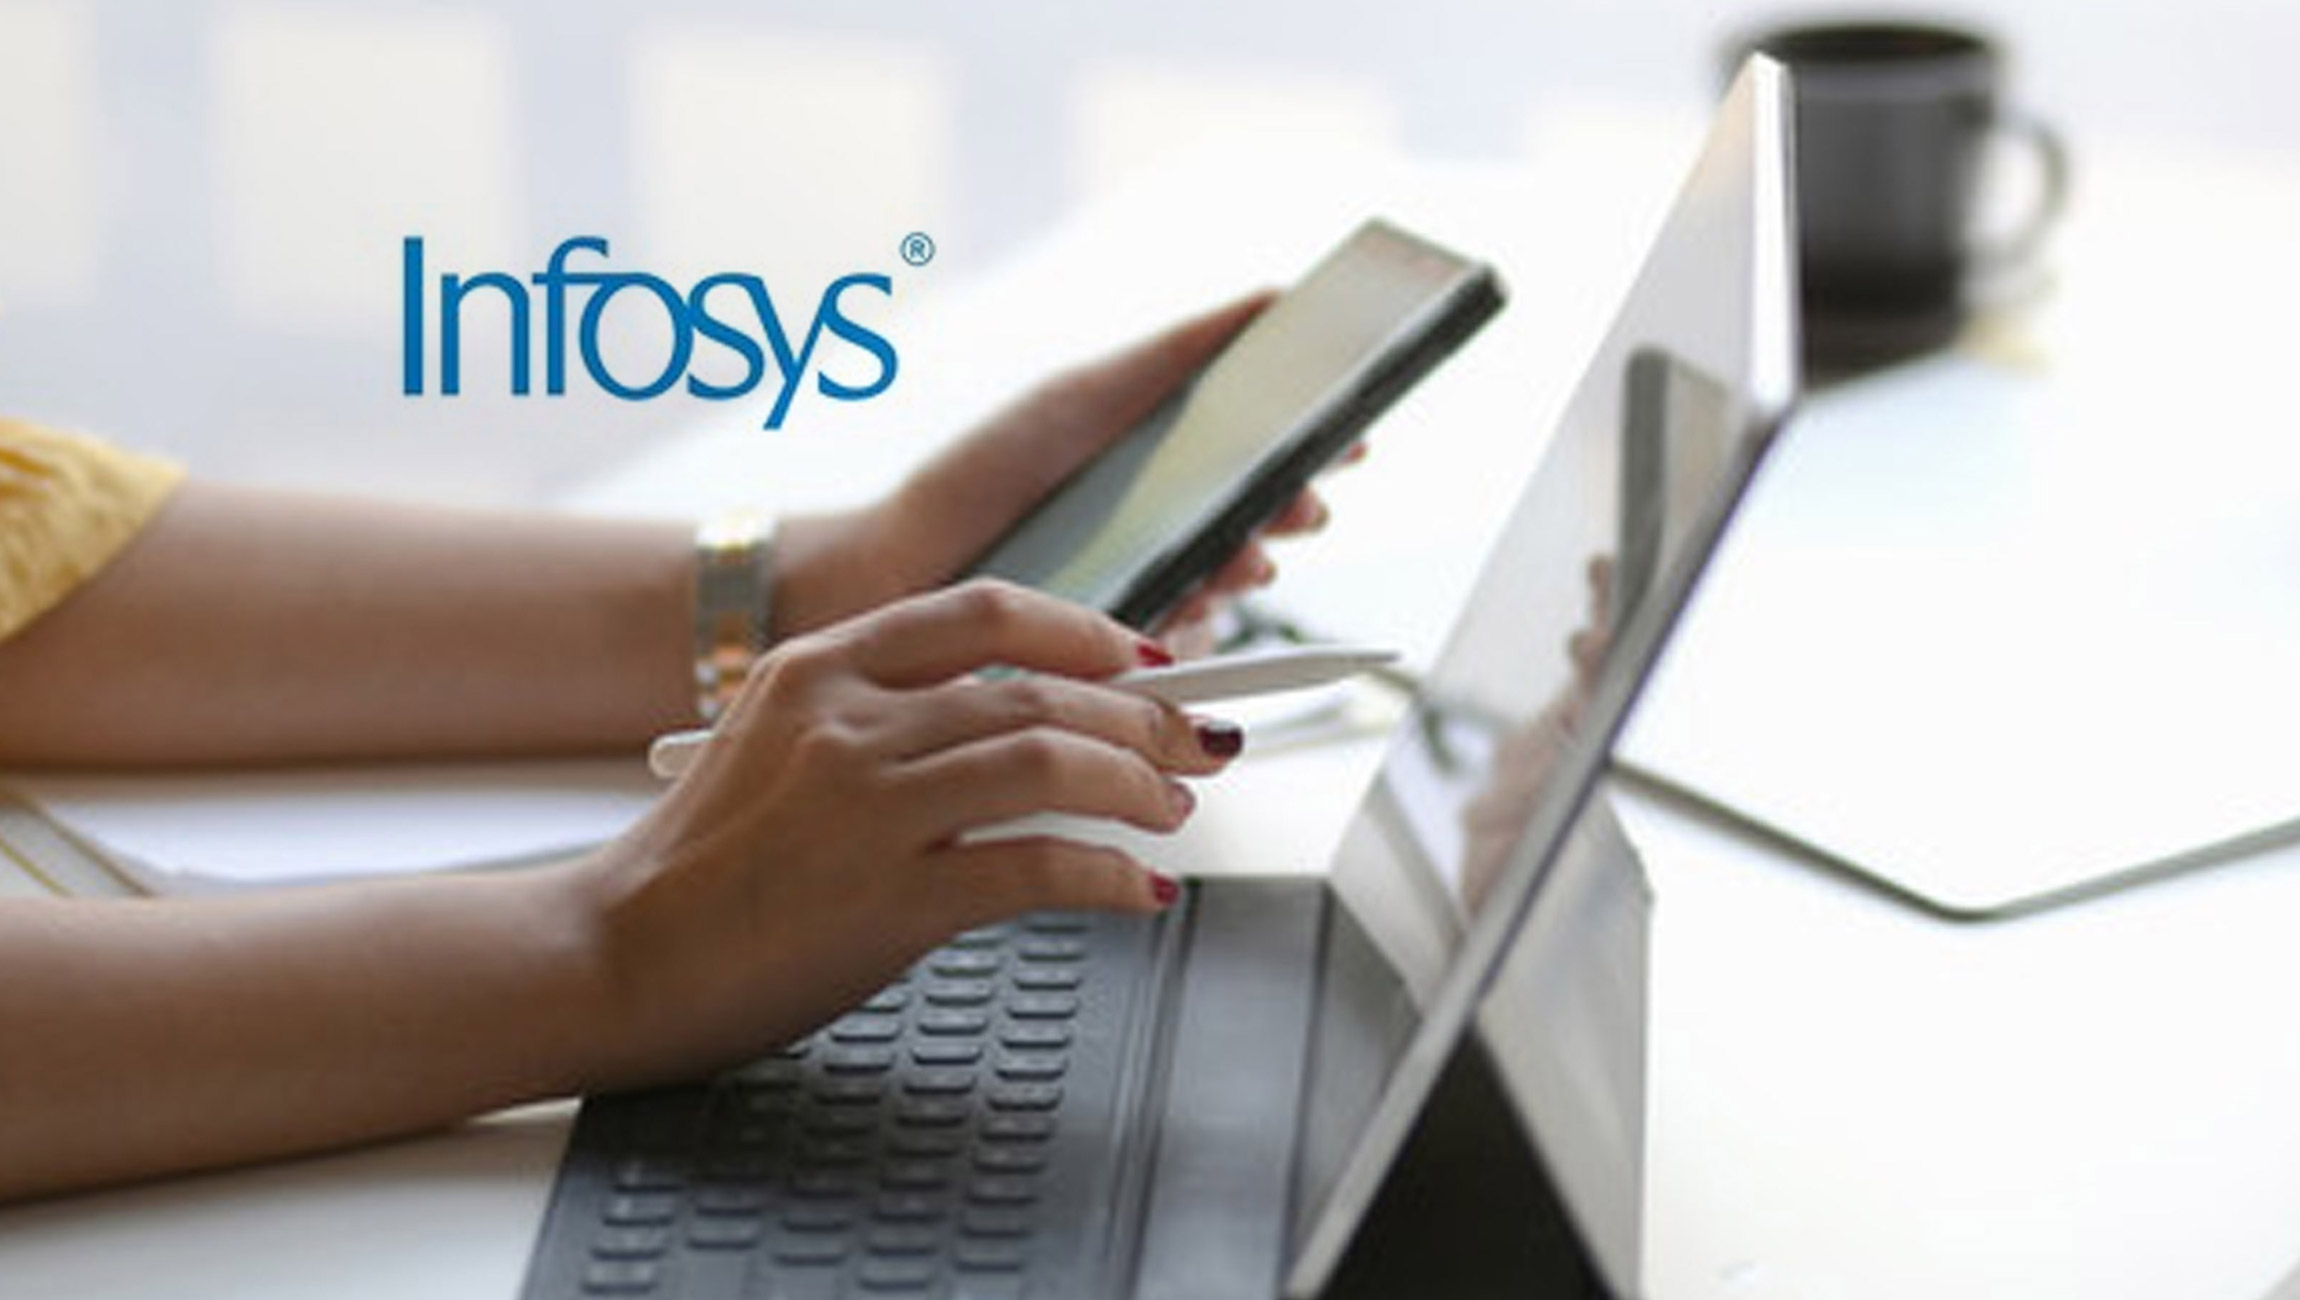 Infosys Recognized as one of the 2022 World's Most Ethical Companies for the Second Consecutive Year by Ethisphere